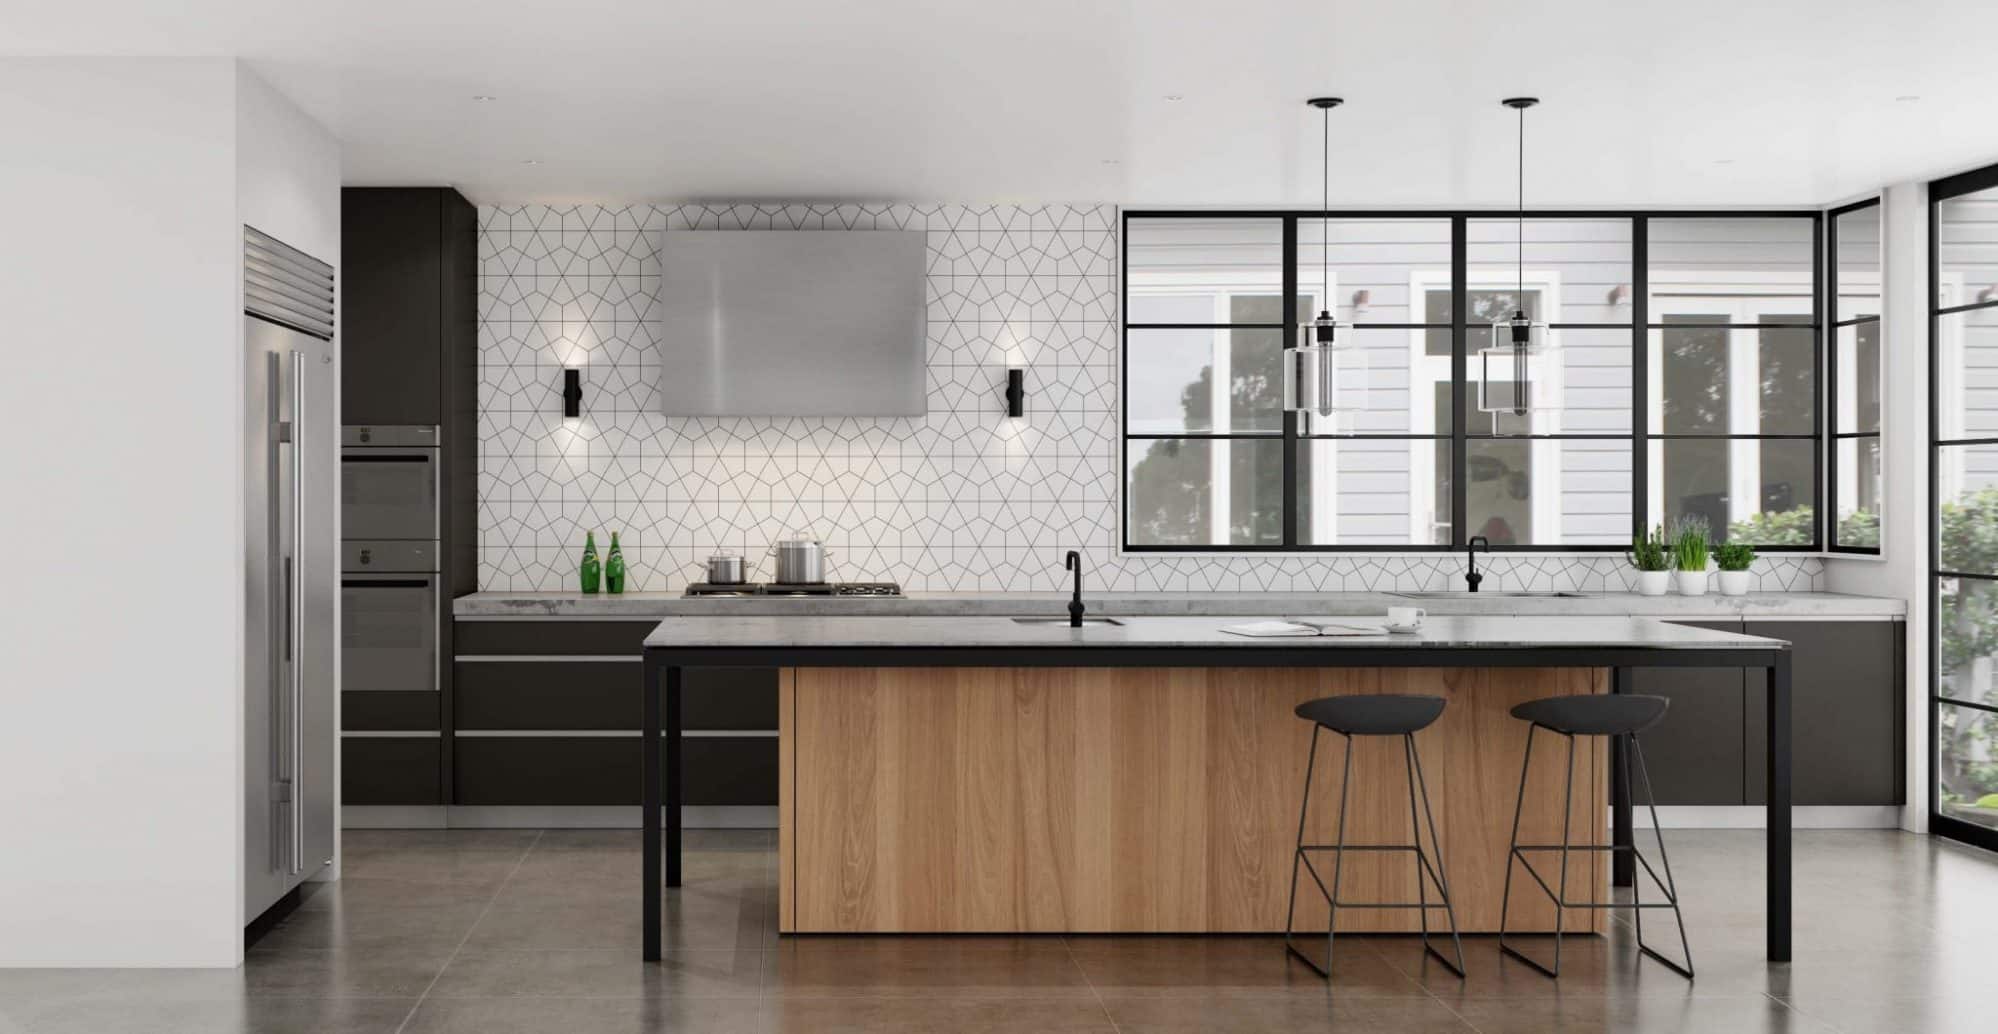 Why Should You Consider Hiring Professional Kitchen Designers